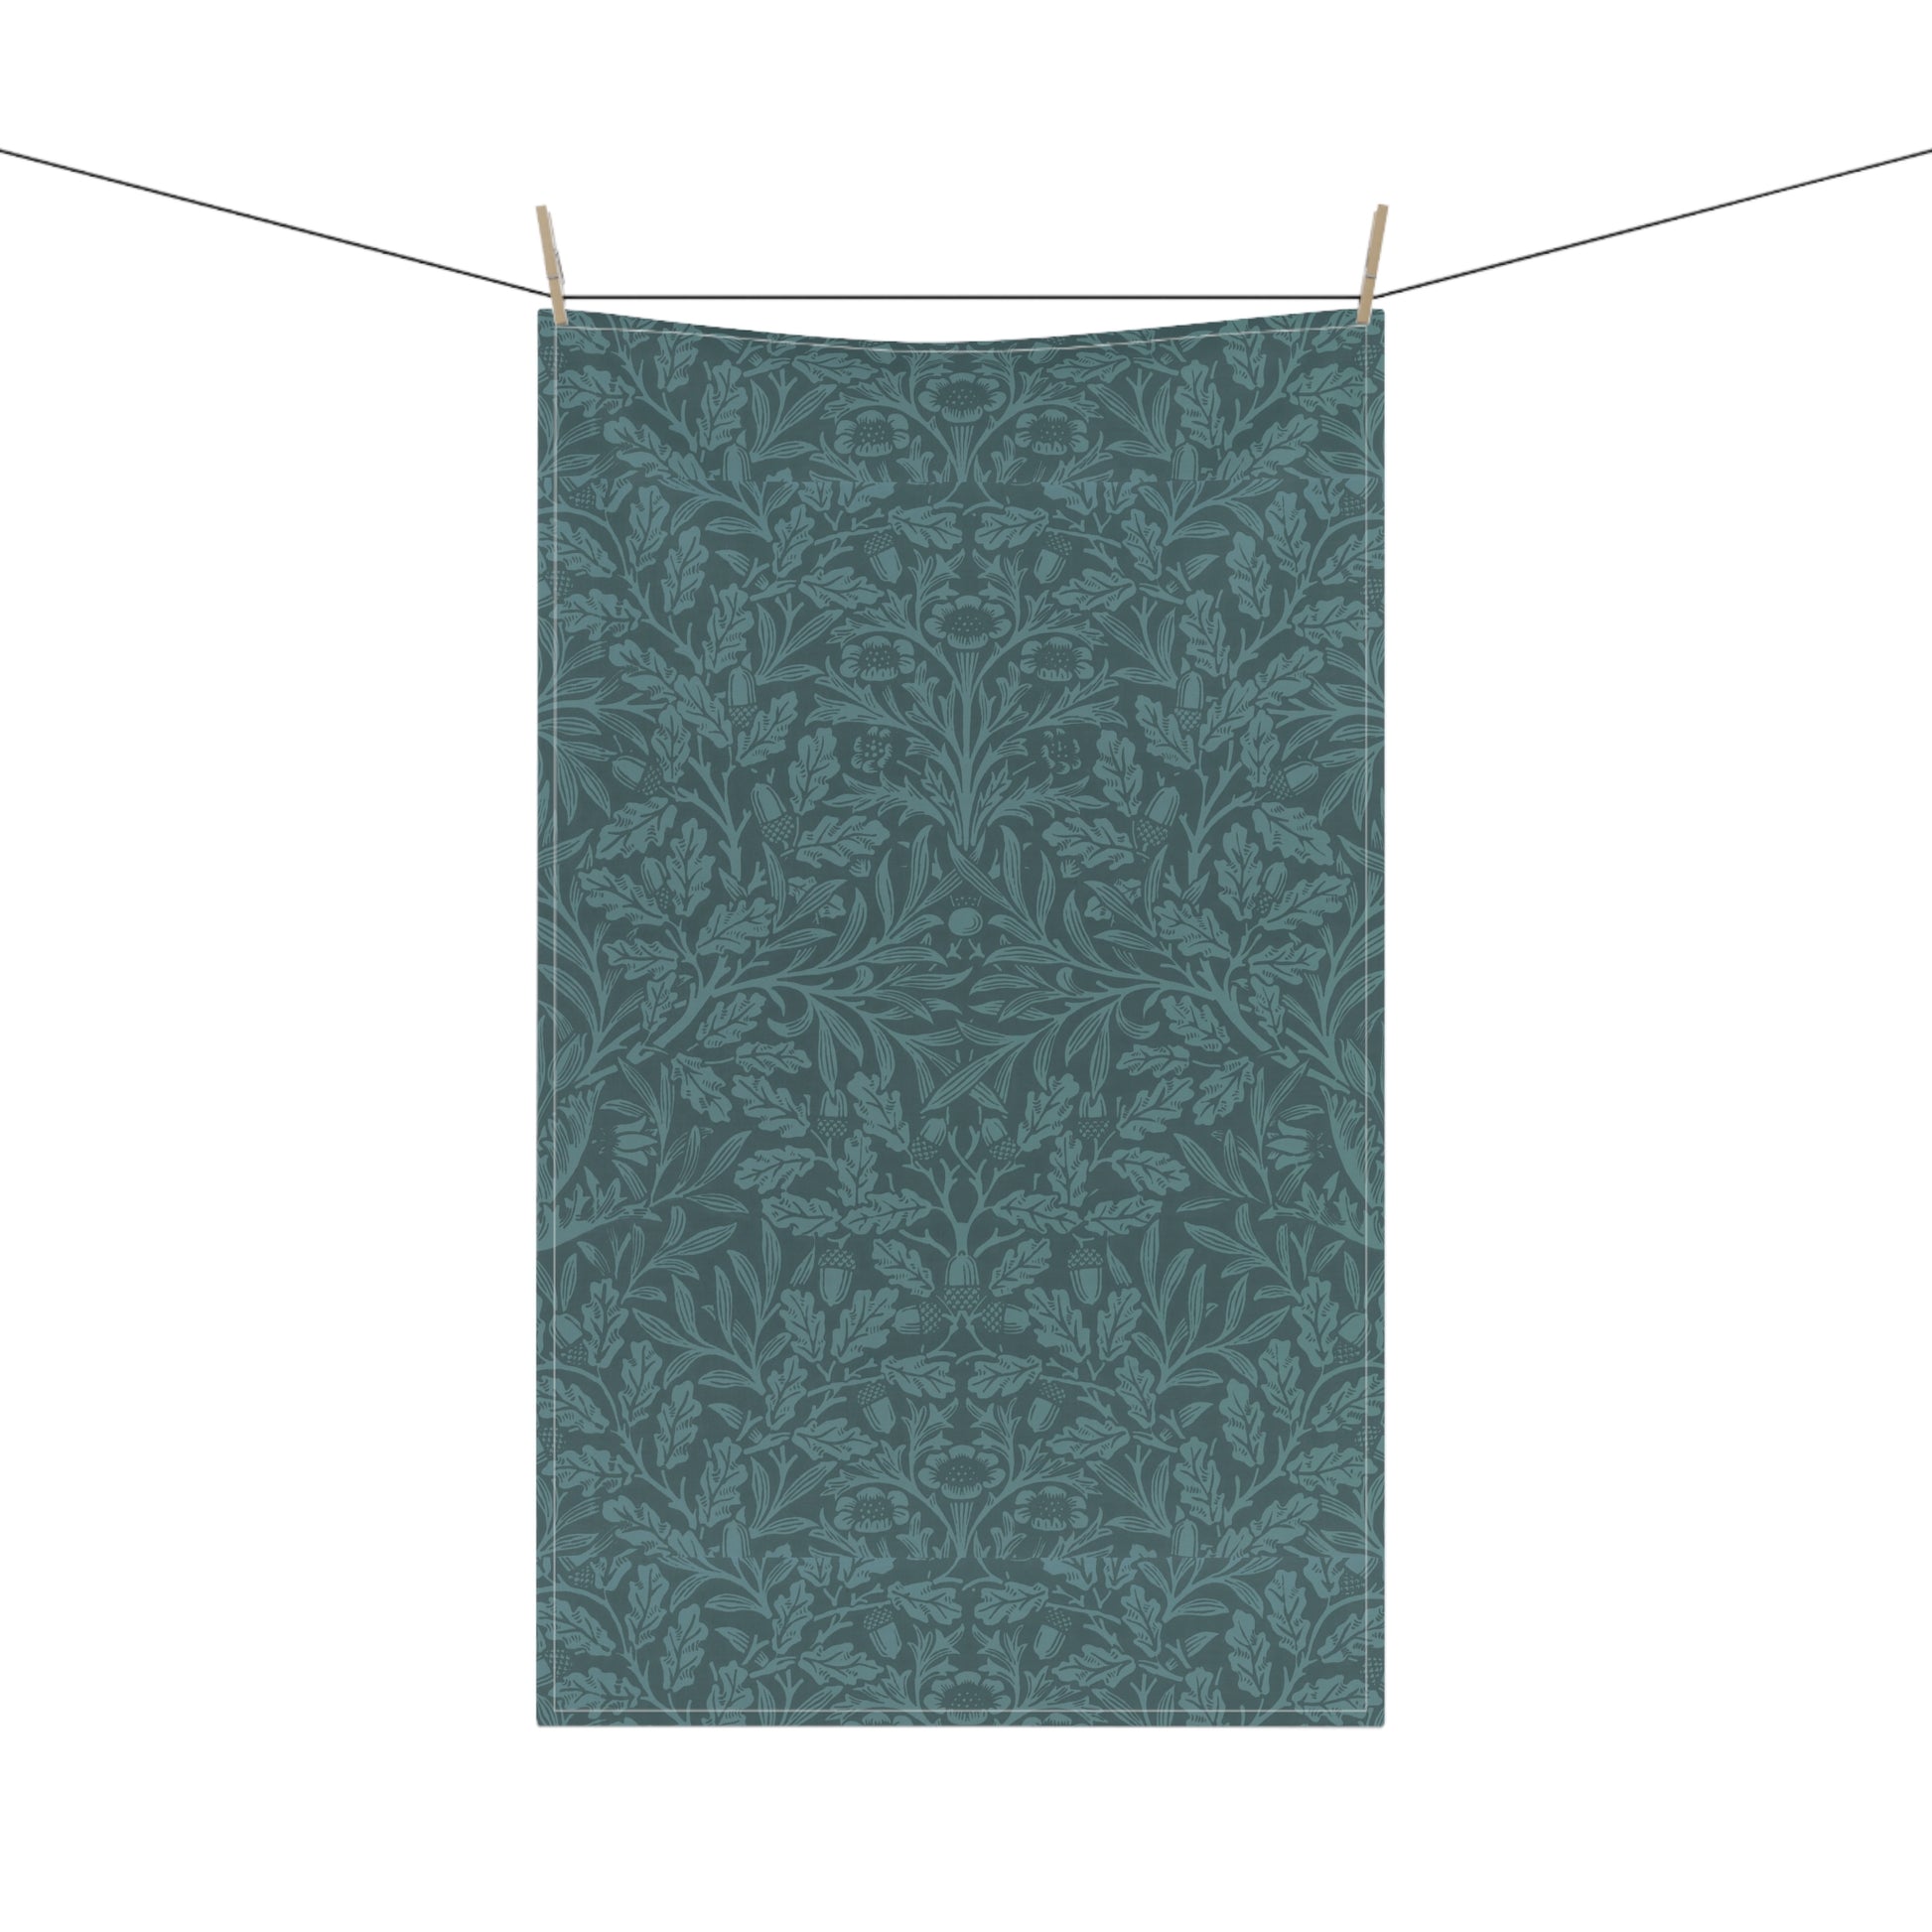 william-morris-co-kitchen-tea-towel-acorn-and-oak-leaves-collection-teal-6